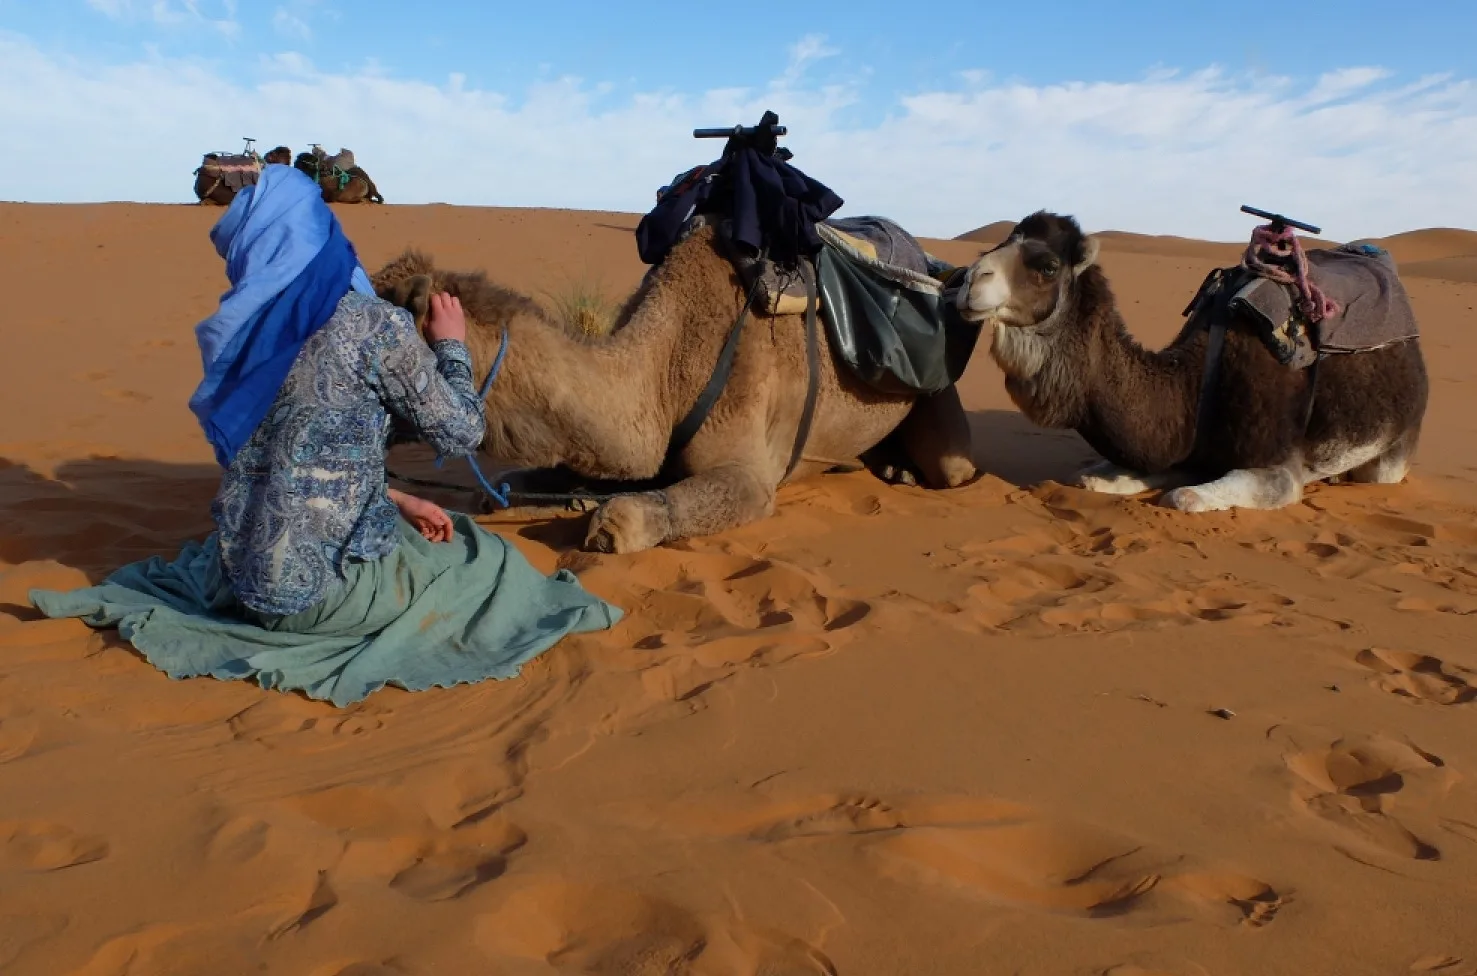 Day 7: Tour of The Dunes & visiting Nomad Families